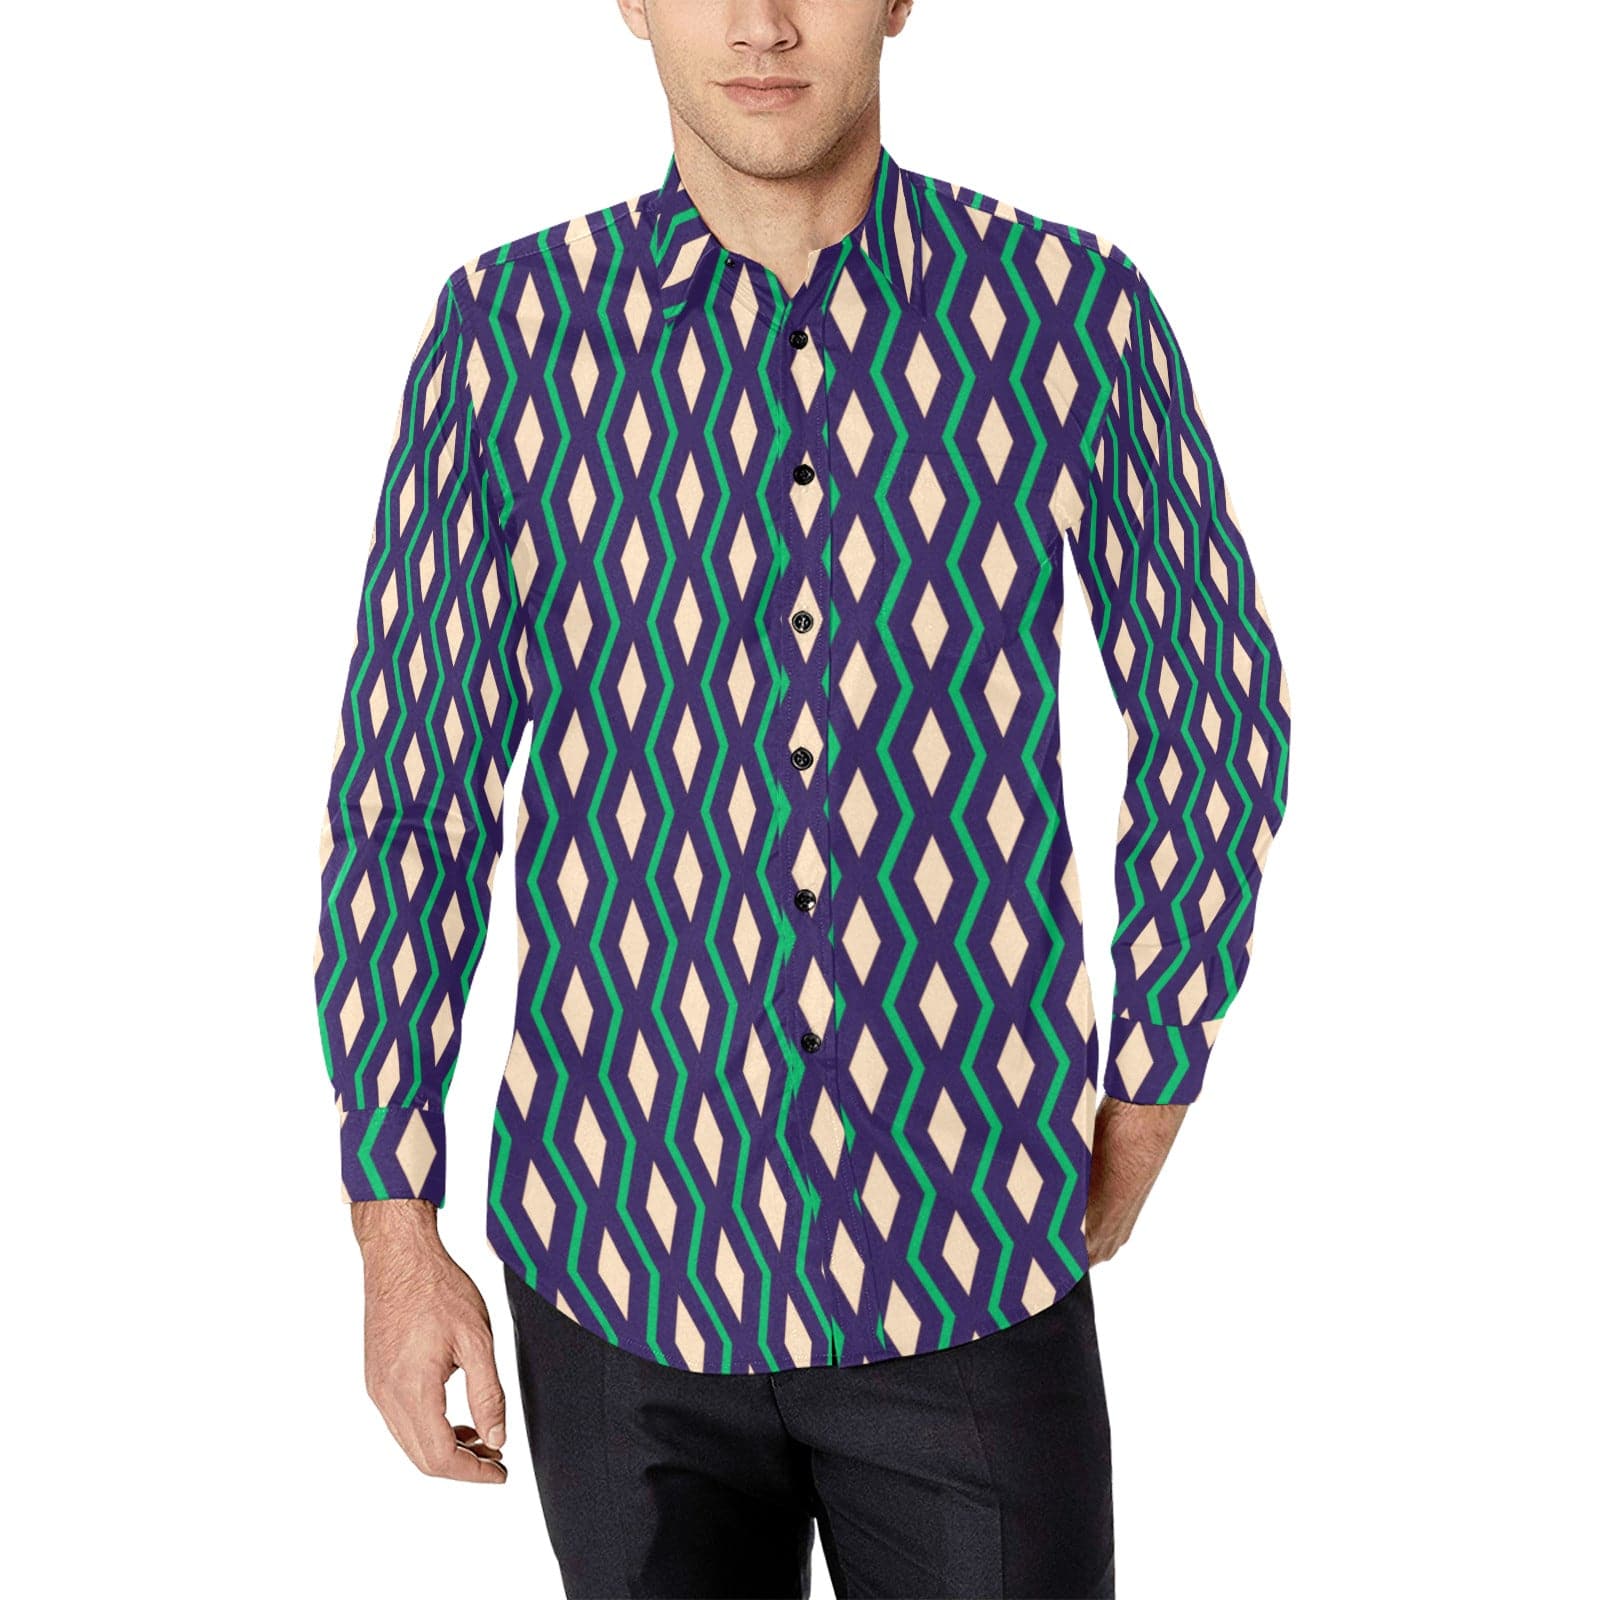 Green Yellow and Purple Patterned Men's Long Sleeve Shirt